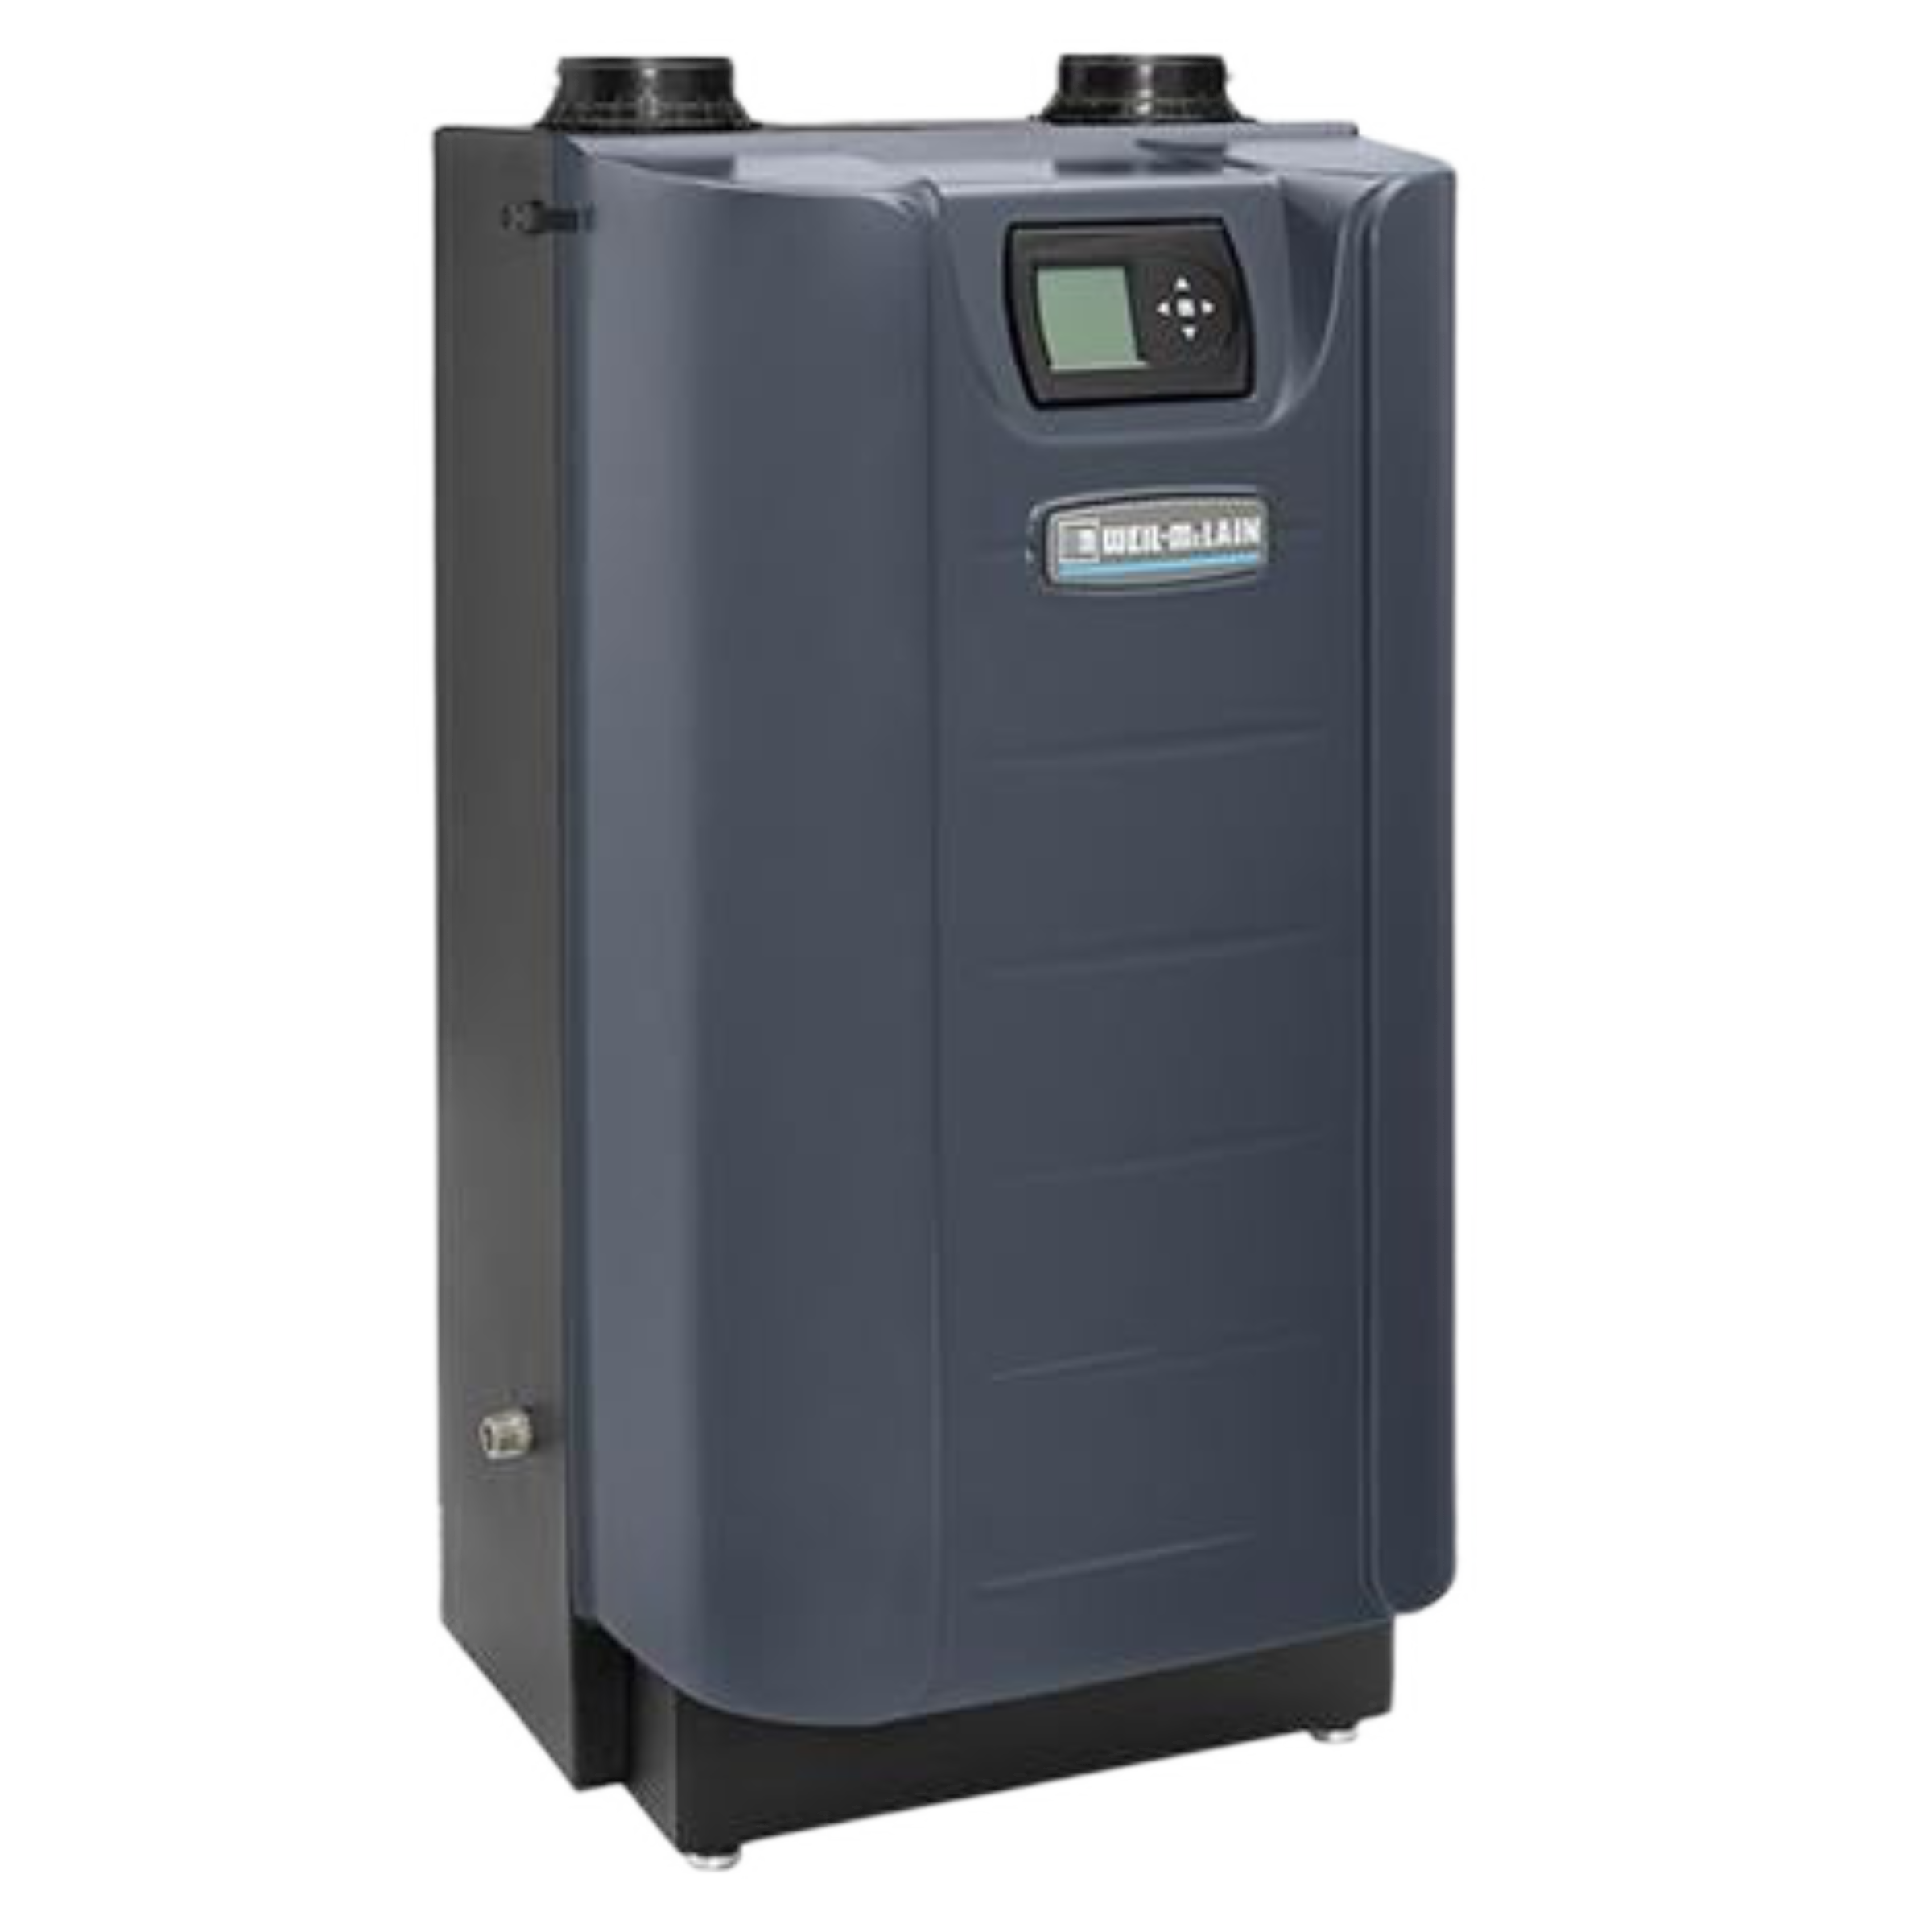 EVG-220 Weil Mclain Evergreen Pro Sereis Natural Gas High-Efficiency Condensing Boiler 220,000 BTU  95.0% AFUE 4.6 Gal for Residential
and Light-Commercial Use, Energy Star Qualified